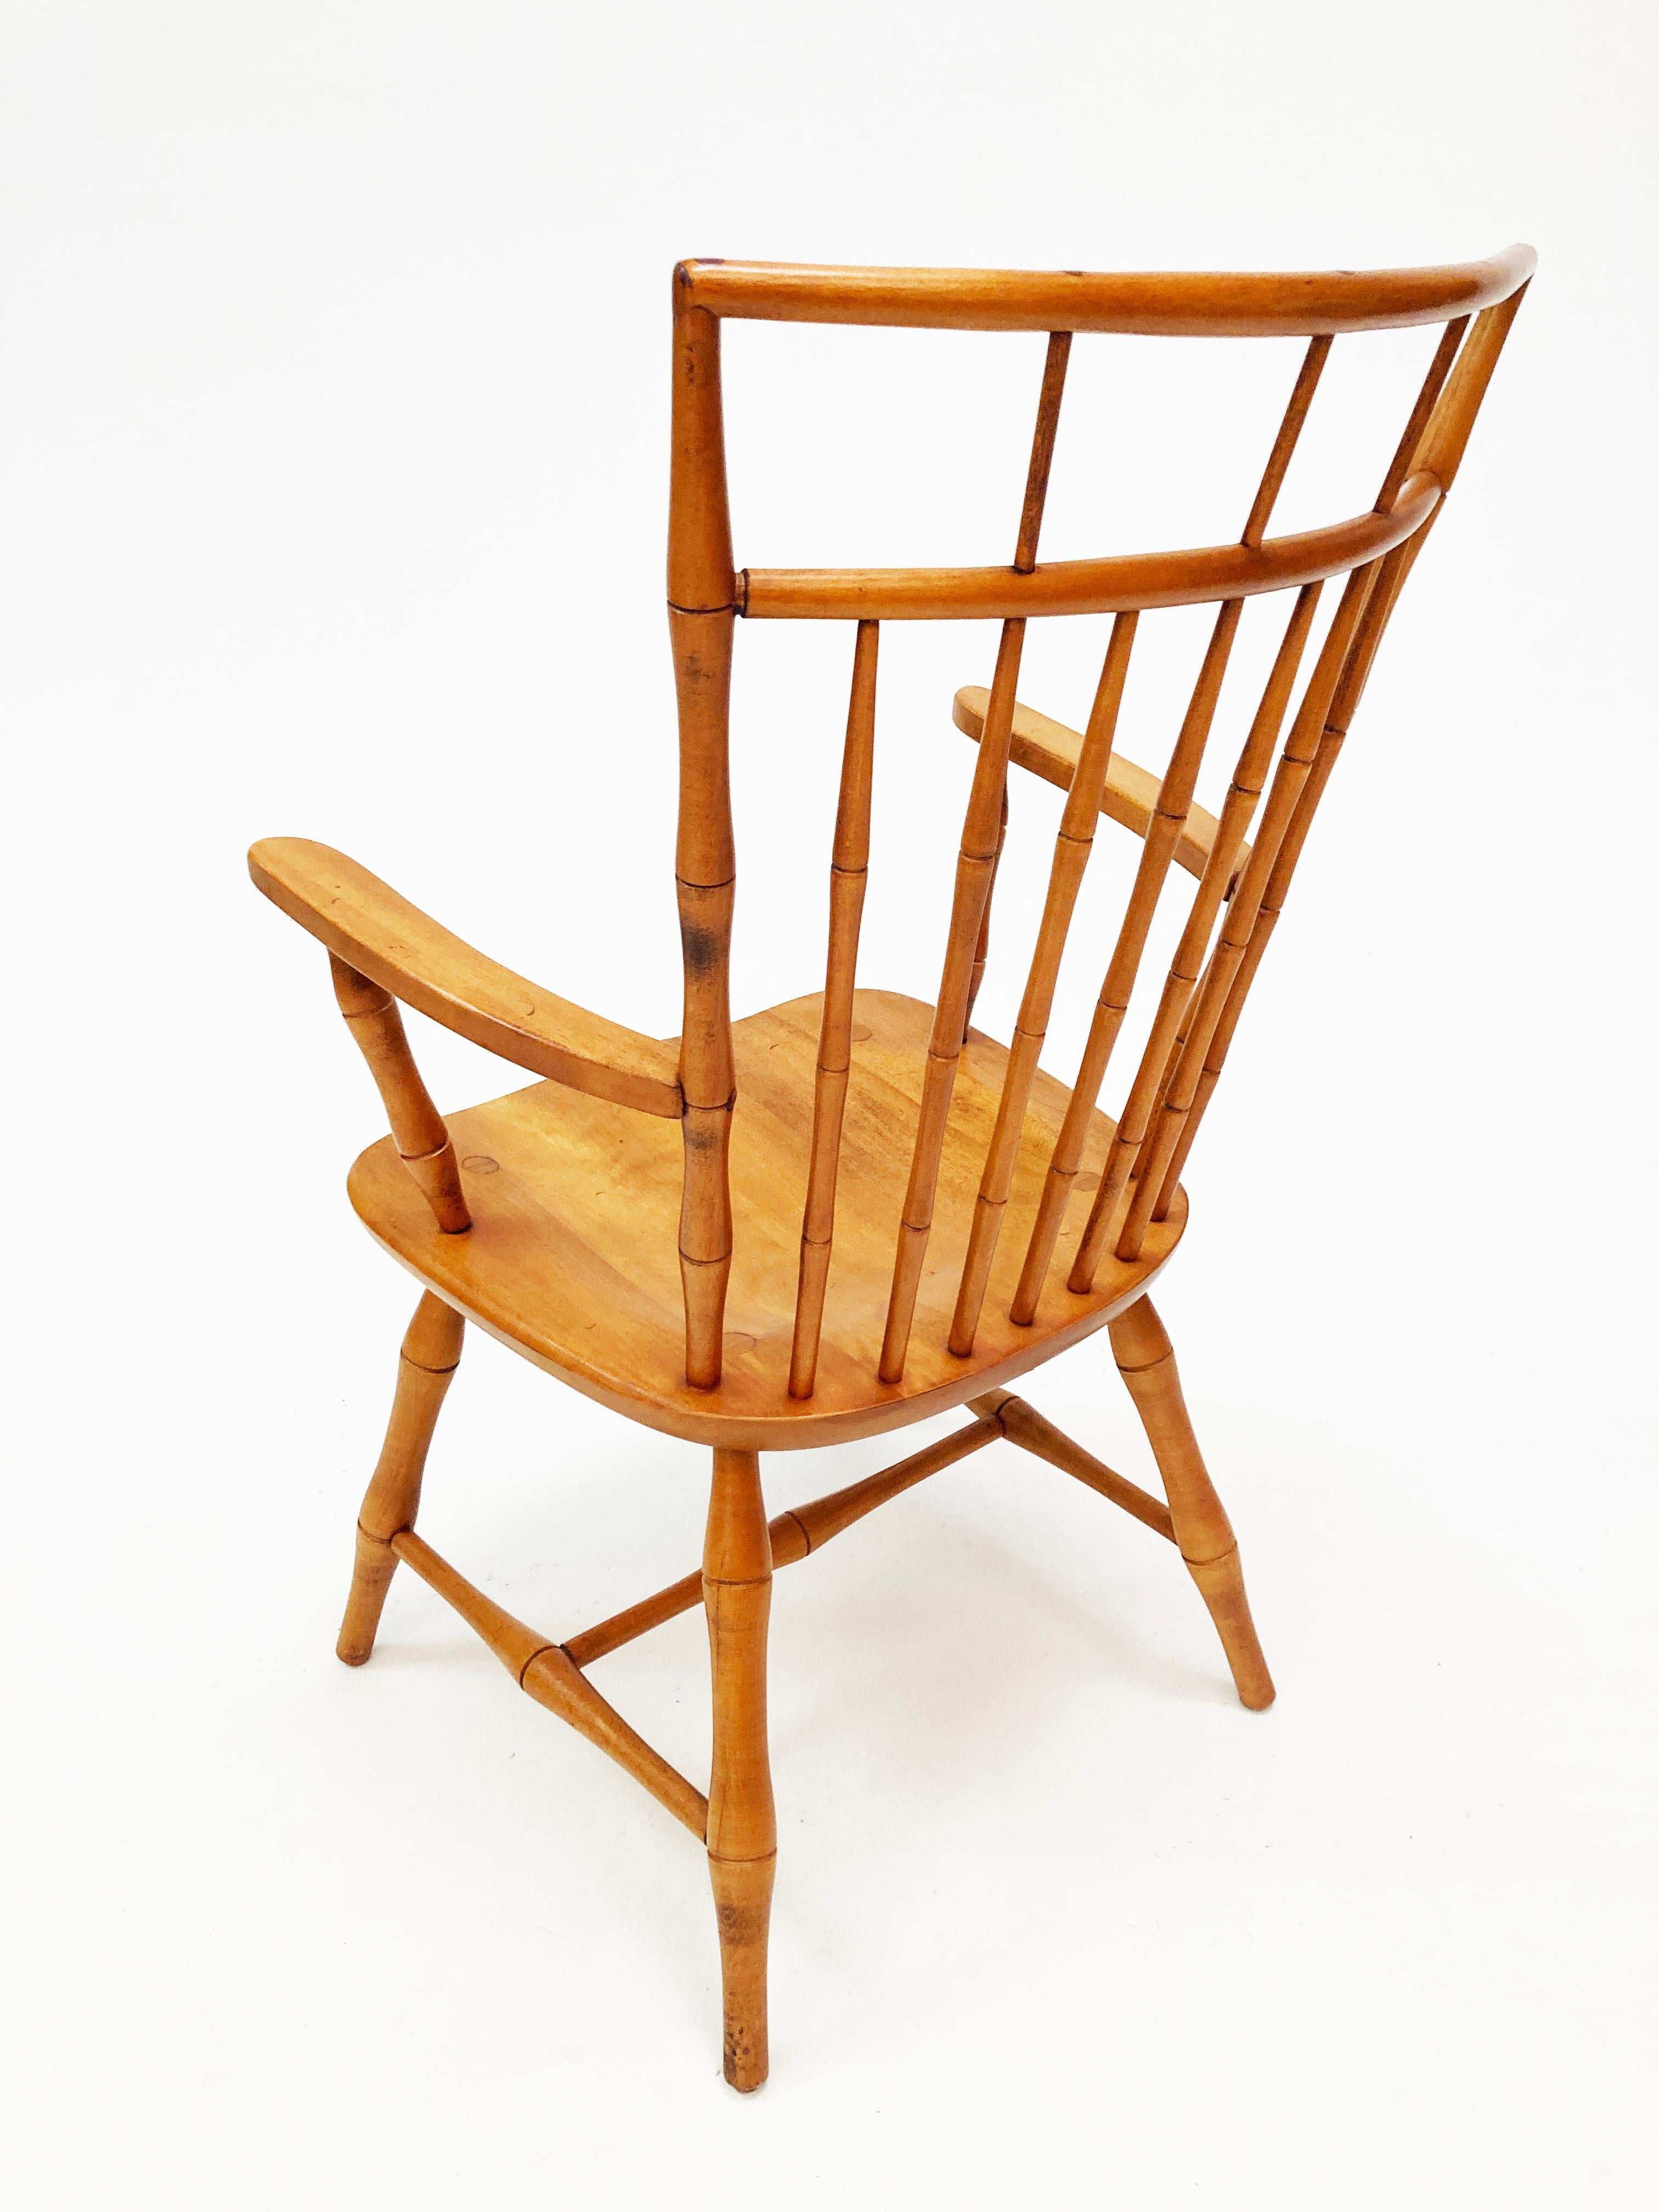 Machine-Made MCM Nichols & Stone American Windsor Birdcage Maple Bamboo Dining Chairs 6 For Sale